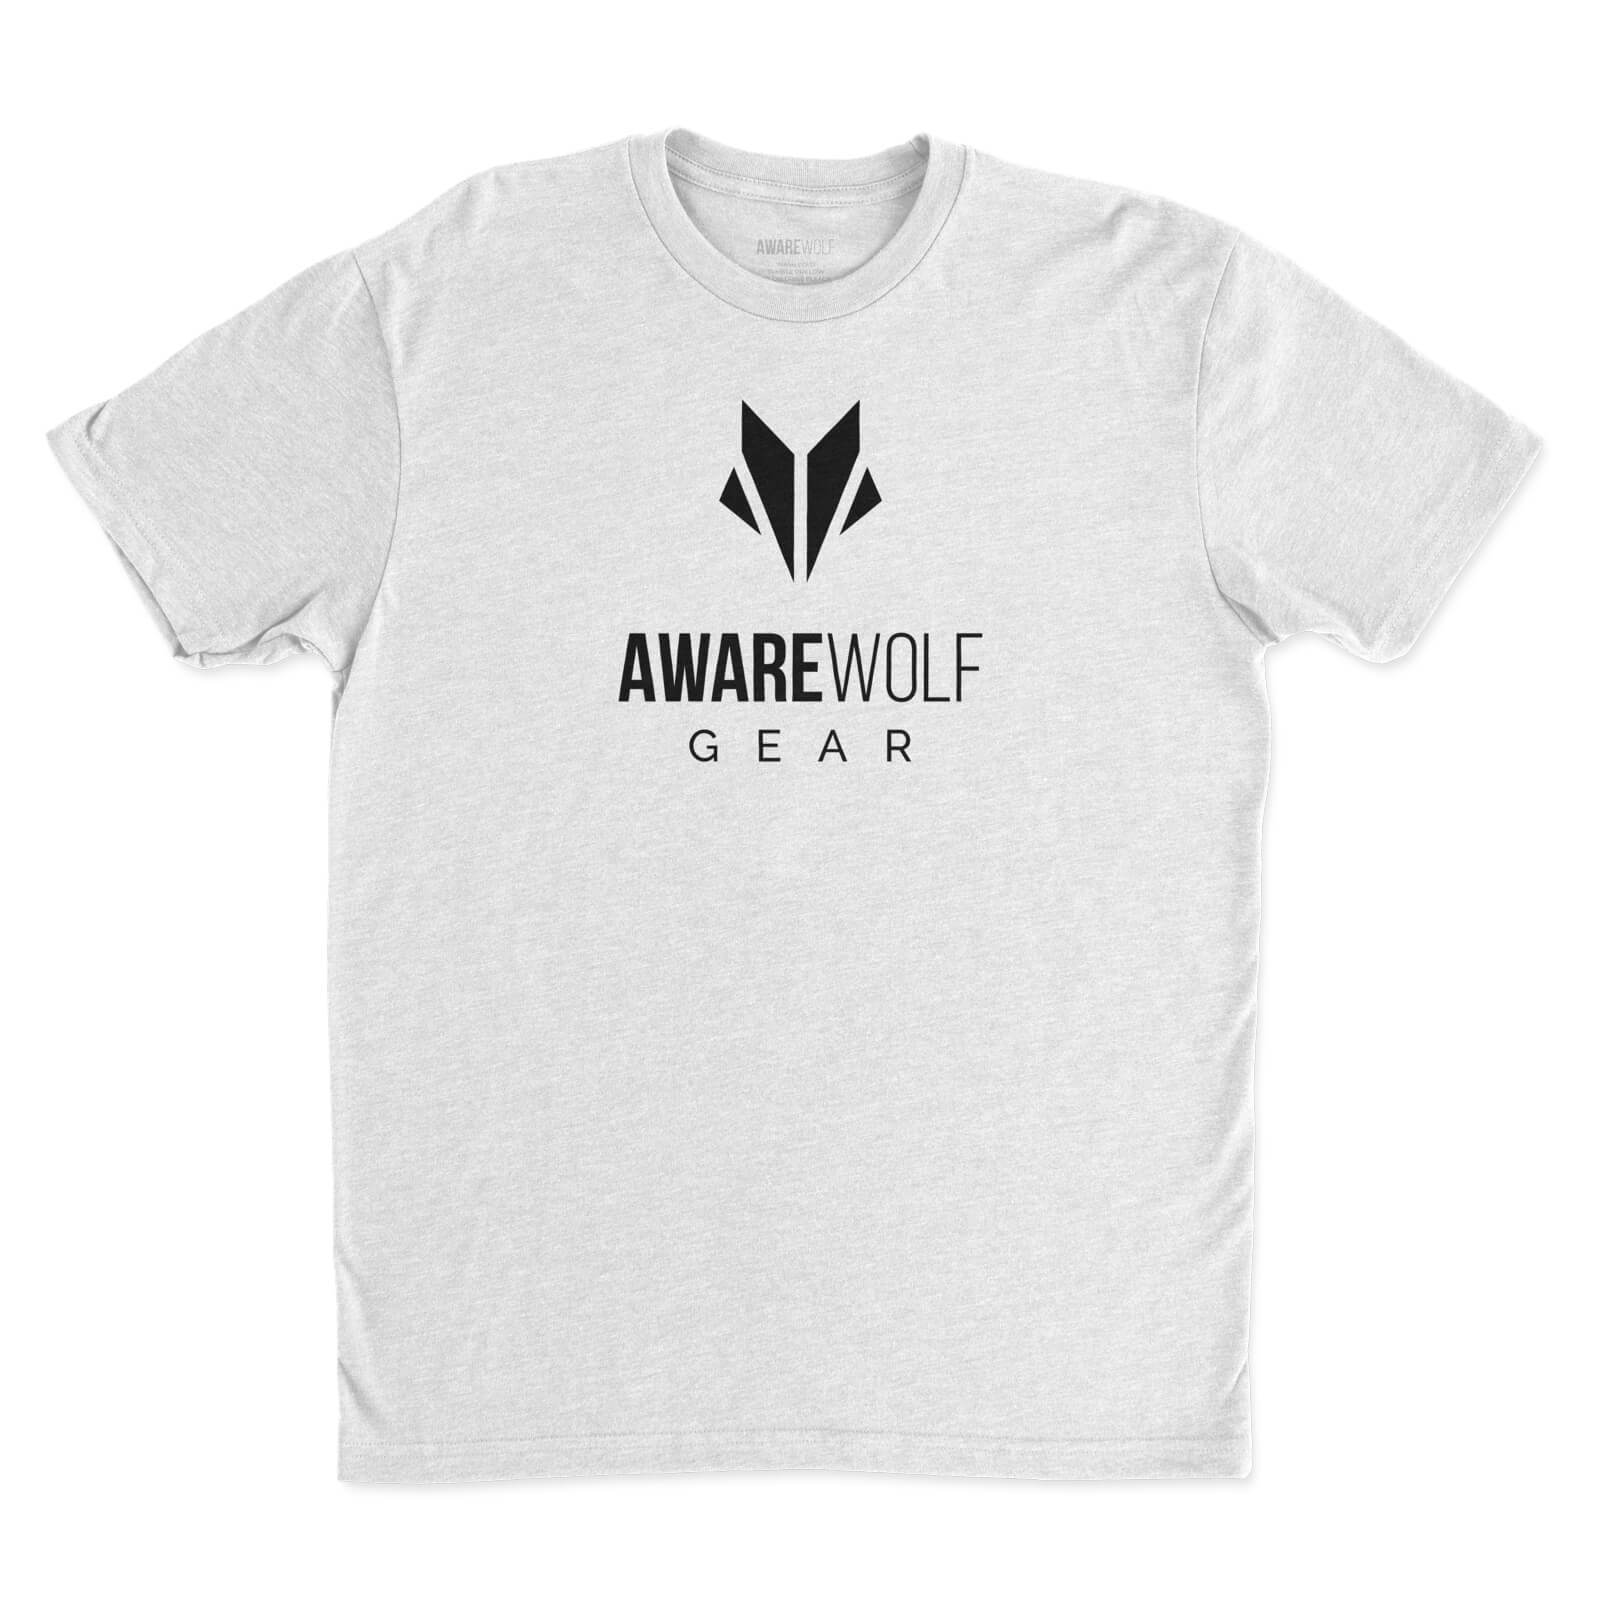 Awarewolf Gear Flagship T White with Black printed ink